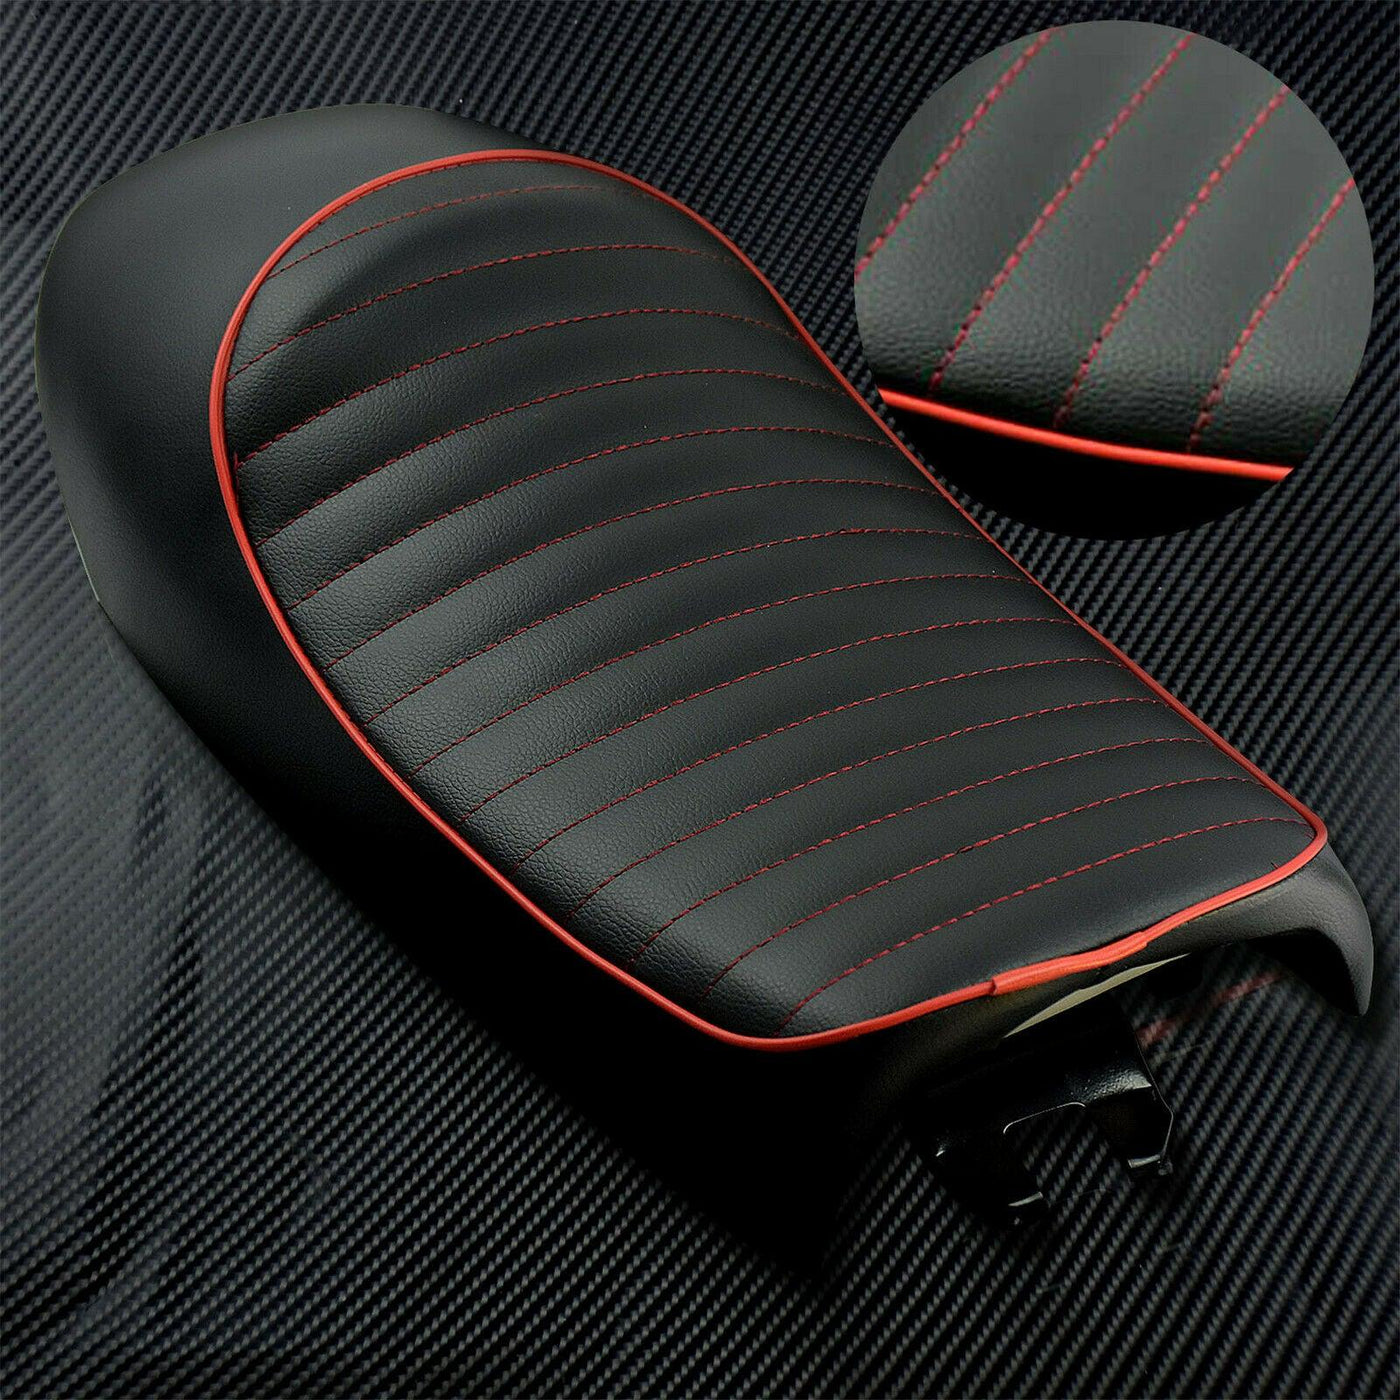 Motorcycle Vintage Cafe Racer Seat Retro Cafe Saddle Fit For CB450 Black & Red - Moto Life Products